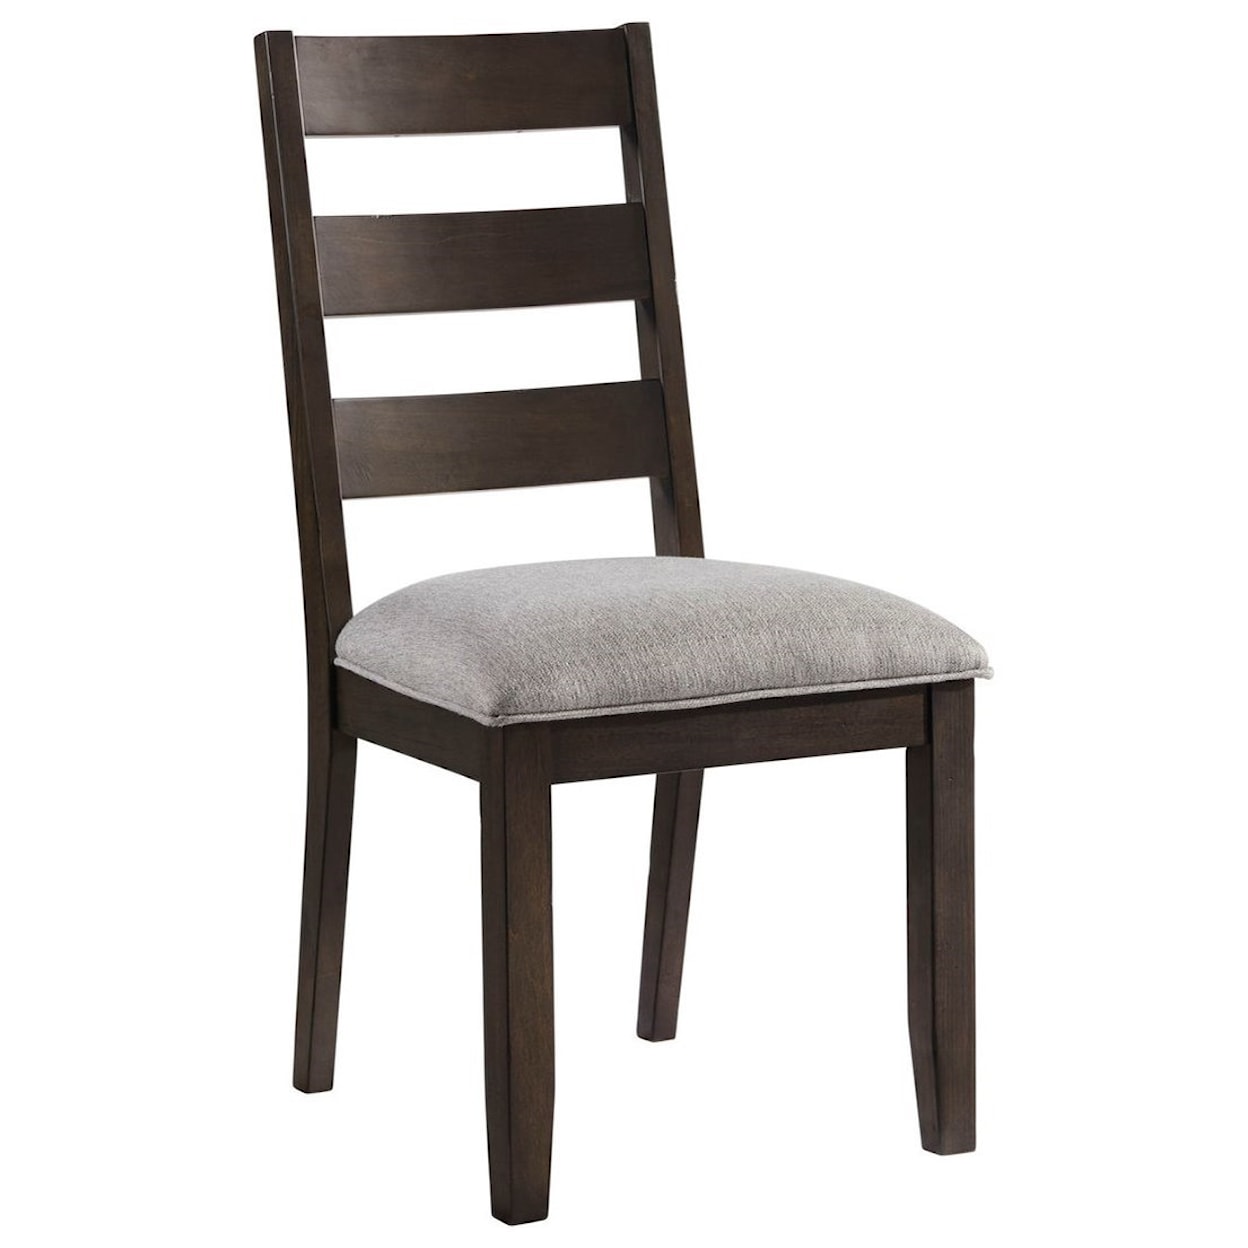 Intercon 31217 3-Piece Table and Chair Set